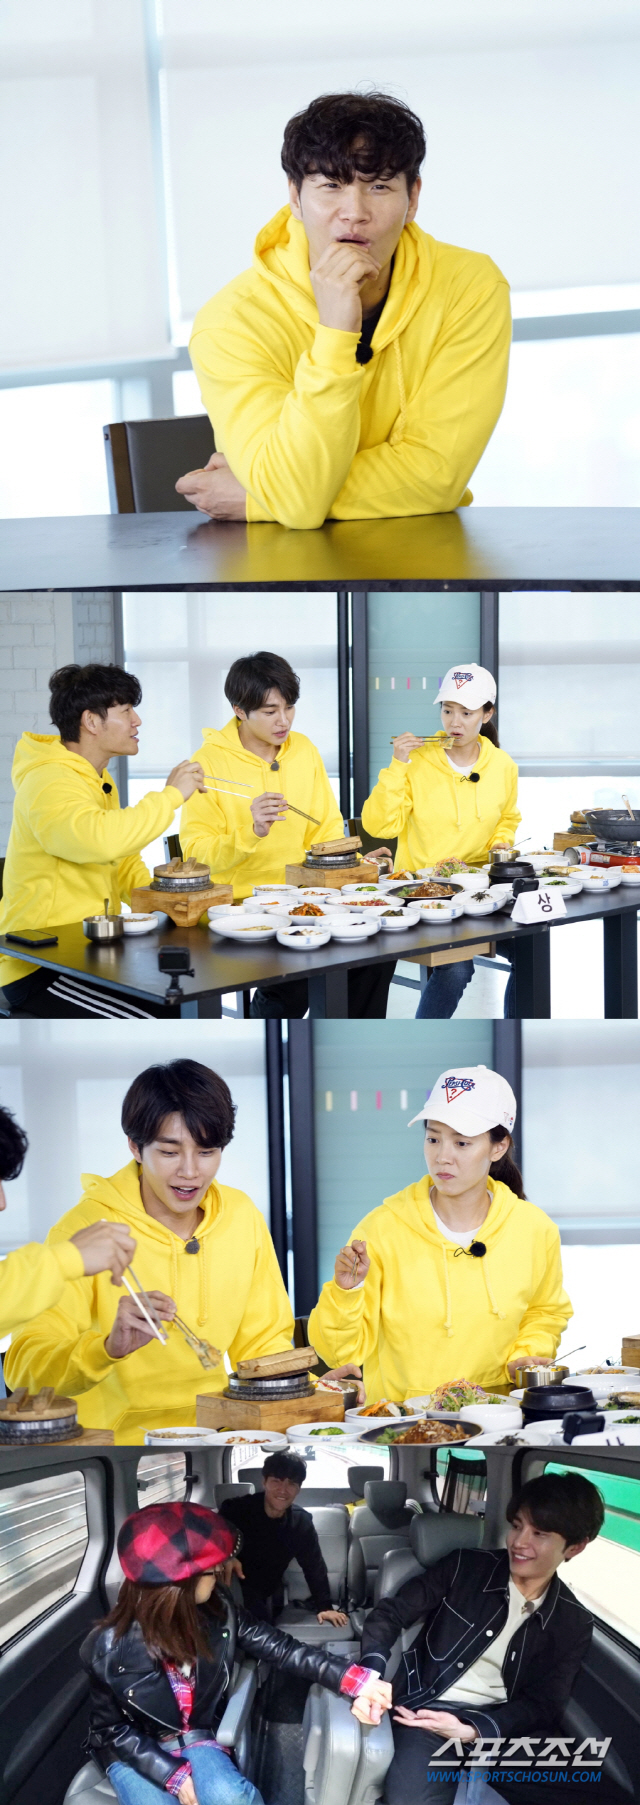 On SBS Running Man, which is broadcasted on the 31st (Sun), the subtle atmosphere of Kim Jong-kook X Song Ji-hyo, which is one step closer to Kim Jong-kooks Honey incident, is drawn.The recent Running Man recording was held as a race to find a secret couple who had infiltrated solo members.The members began to reason for a secret couple pretending to be solo with all their touch, and Kim Jong-kook cited Song Ji-hyo as a secret couple candidate and Hoonnam actor Jae-young Kim, a model who appeared as a guest.In particular, Kim Jong-kook continued to point out the familiarity of Jae-young Kim and Song Ji-hyo, unlike other members who suspected several people, and drove them into a secret couple.Kim Jong-kook strongly suspected the two as secret couples, testifying that Song Ji-hyo had talked to Jae-young Kim comfortably and had even grabbed his hand.So Song Ji-hyo insisted on innocence and said, If I am not a secret couple, Kim Jong-kook is jealous now. Other members also added that Kim Jong-kooks attitude was jealous.On the other hand, guest Jang Hee-jin said, Kim Jong-kook is a little scary. Song Ji-hyo said, Its a good person to know. The subtle sluggish situation of Running Man Monday Couple was produced.The whole of the subtle love line to the Monday couple can be found on Running Man which is broadcasted at 5 pm on Sunday, 31st.